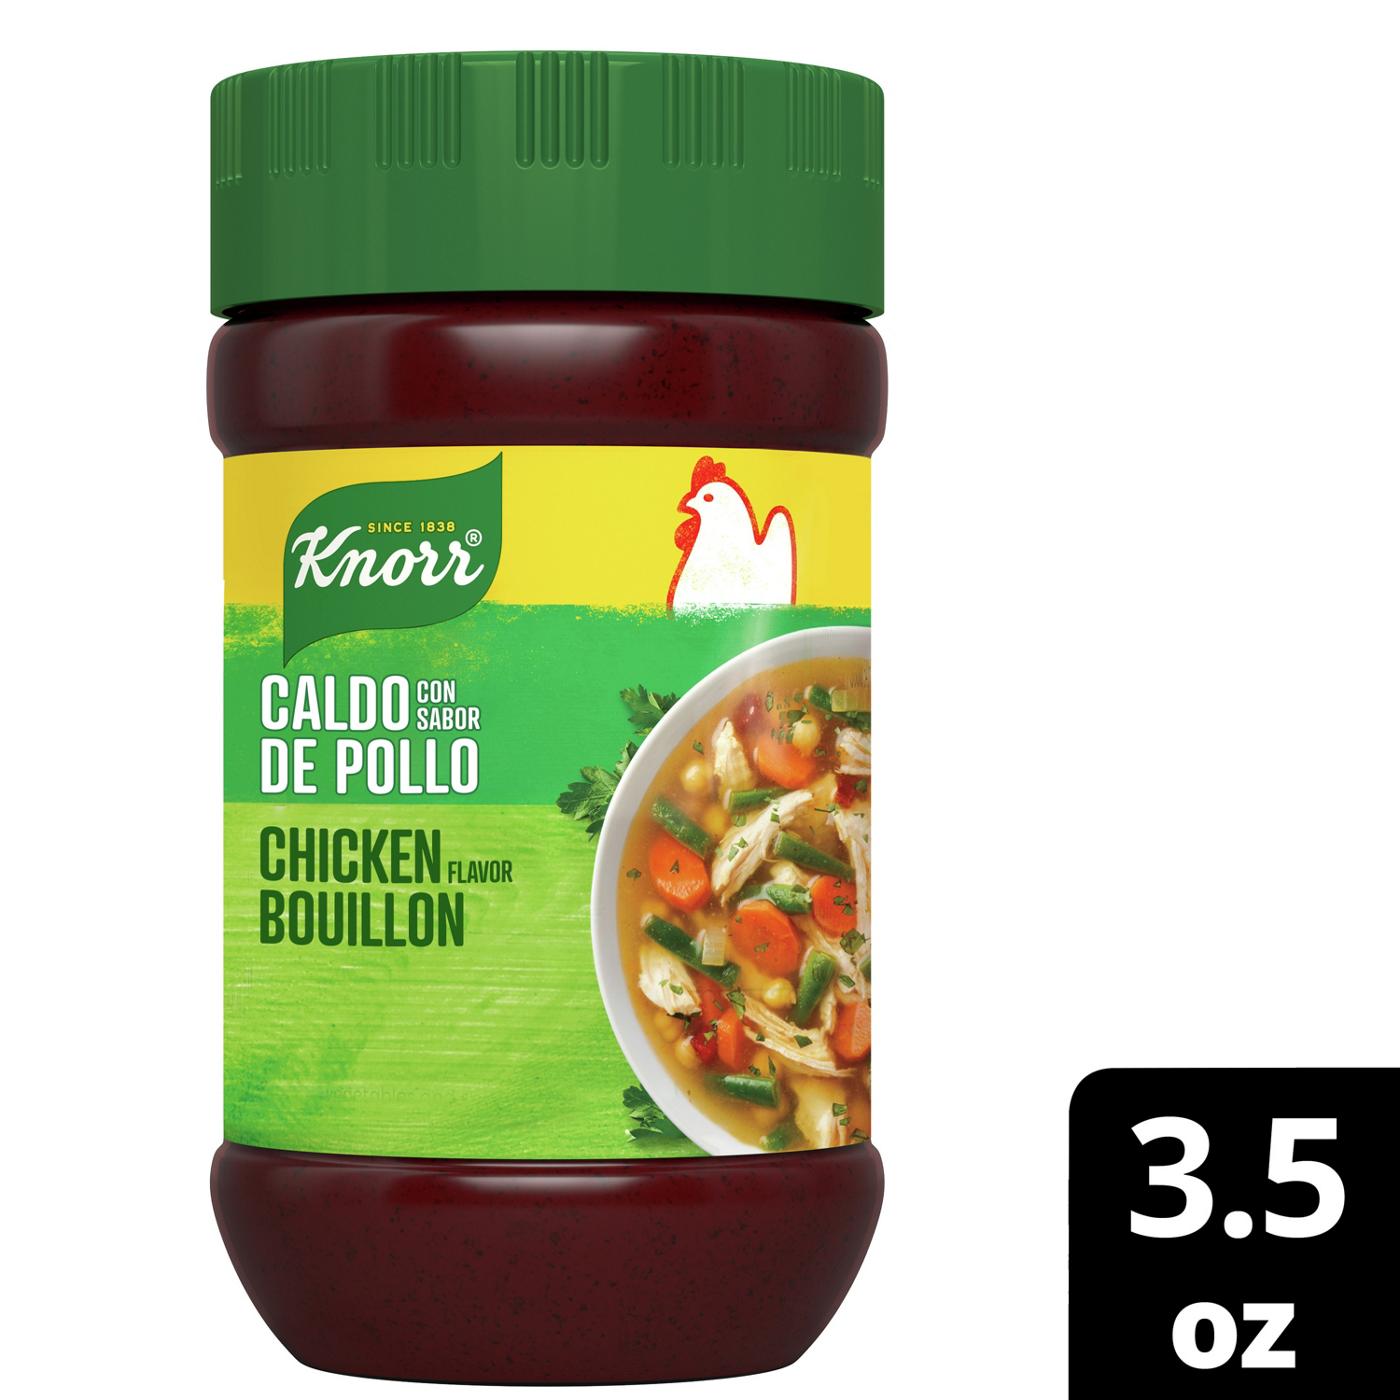 Knorr Chicken Granulated Bouillon; image 4 of 6